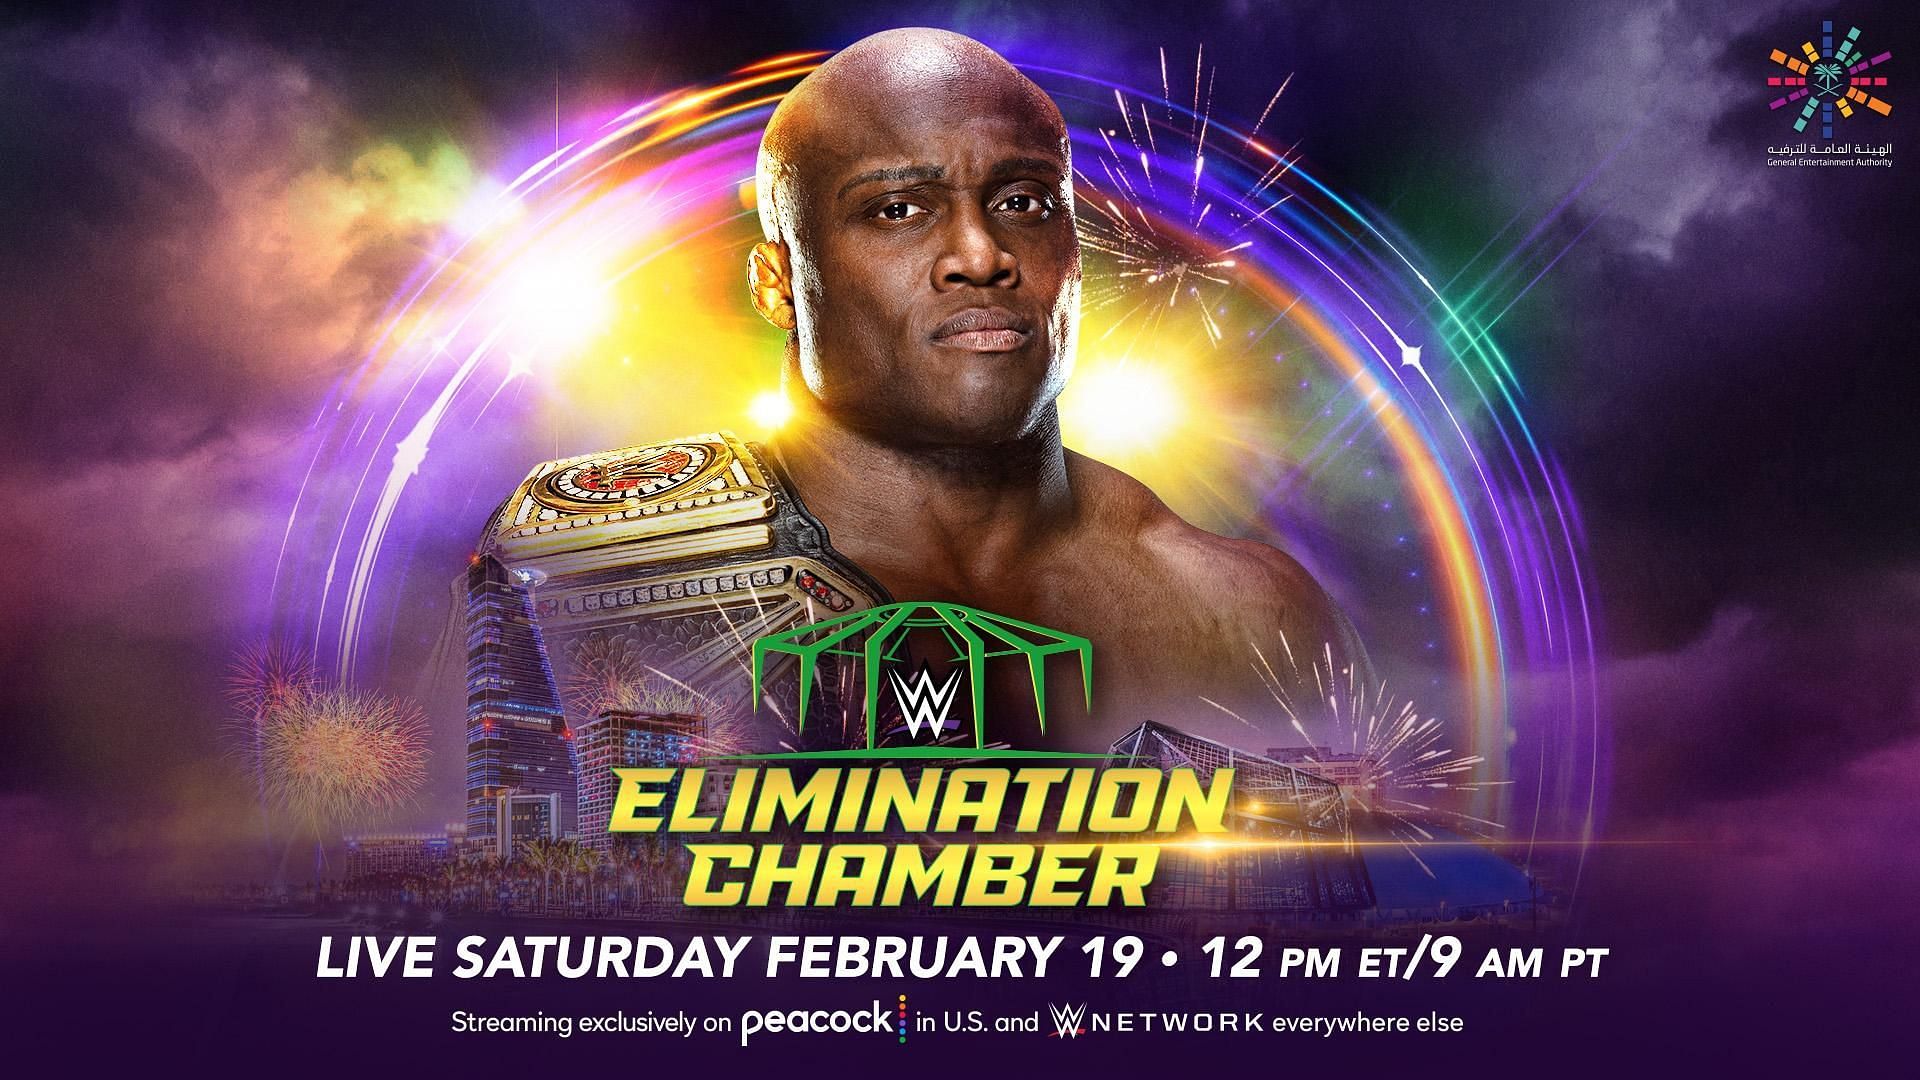 Bobby Lashley will defend his newly won WWE Championship inside the Elimination Chamber